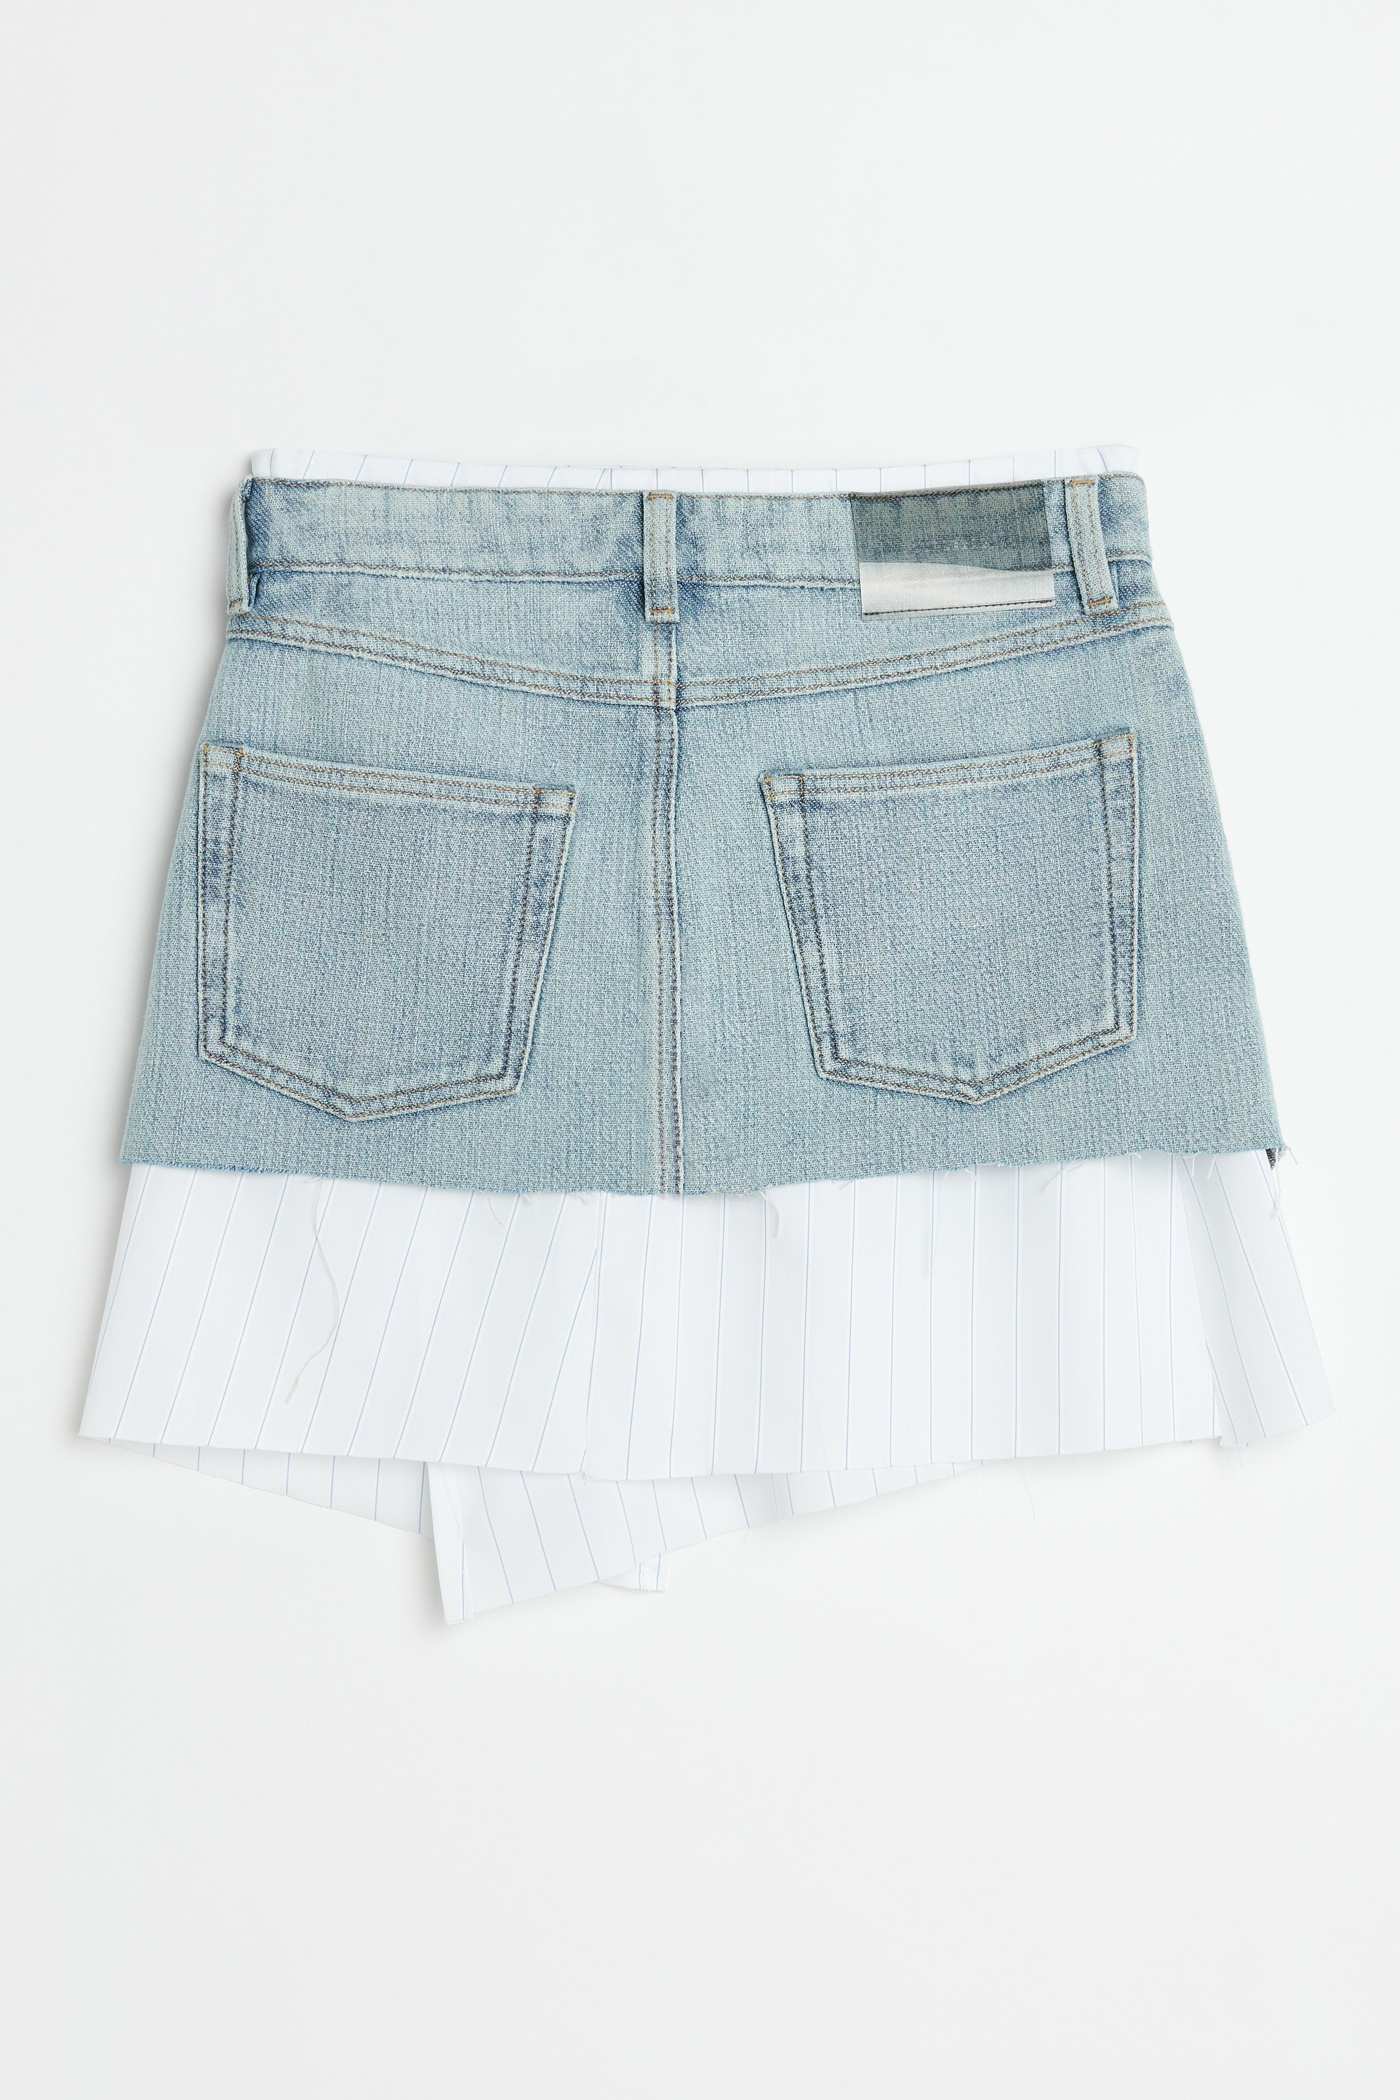 Our Legacy Mini Denim Skirt in Bleached Lurex Woof. 98% Cotton 2% Polyester. Womens Slim Fit Short S - 8